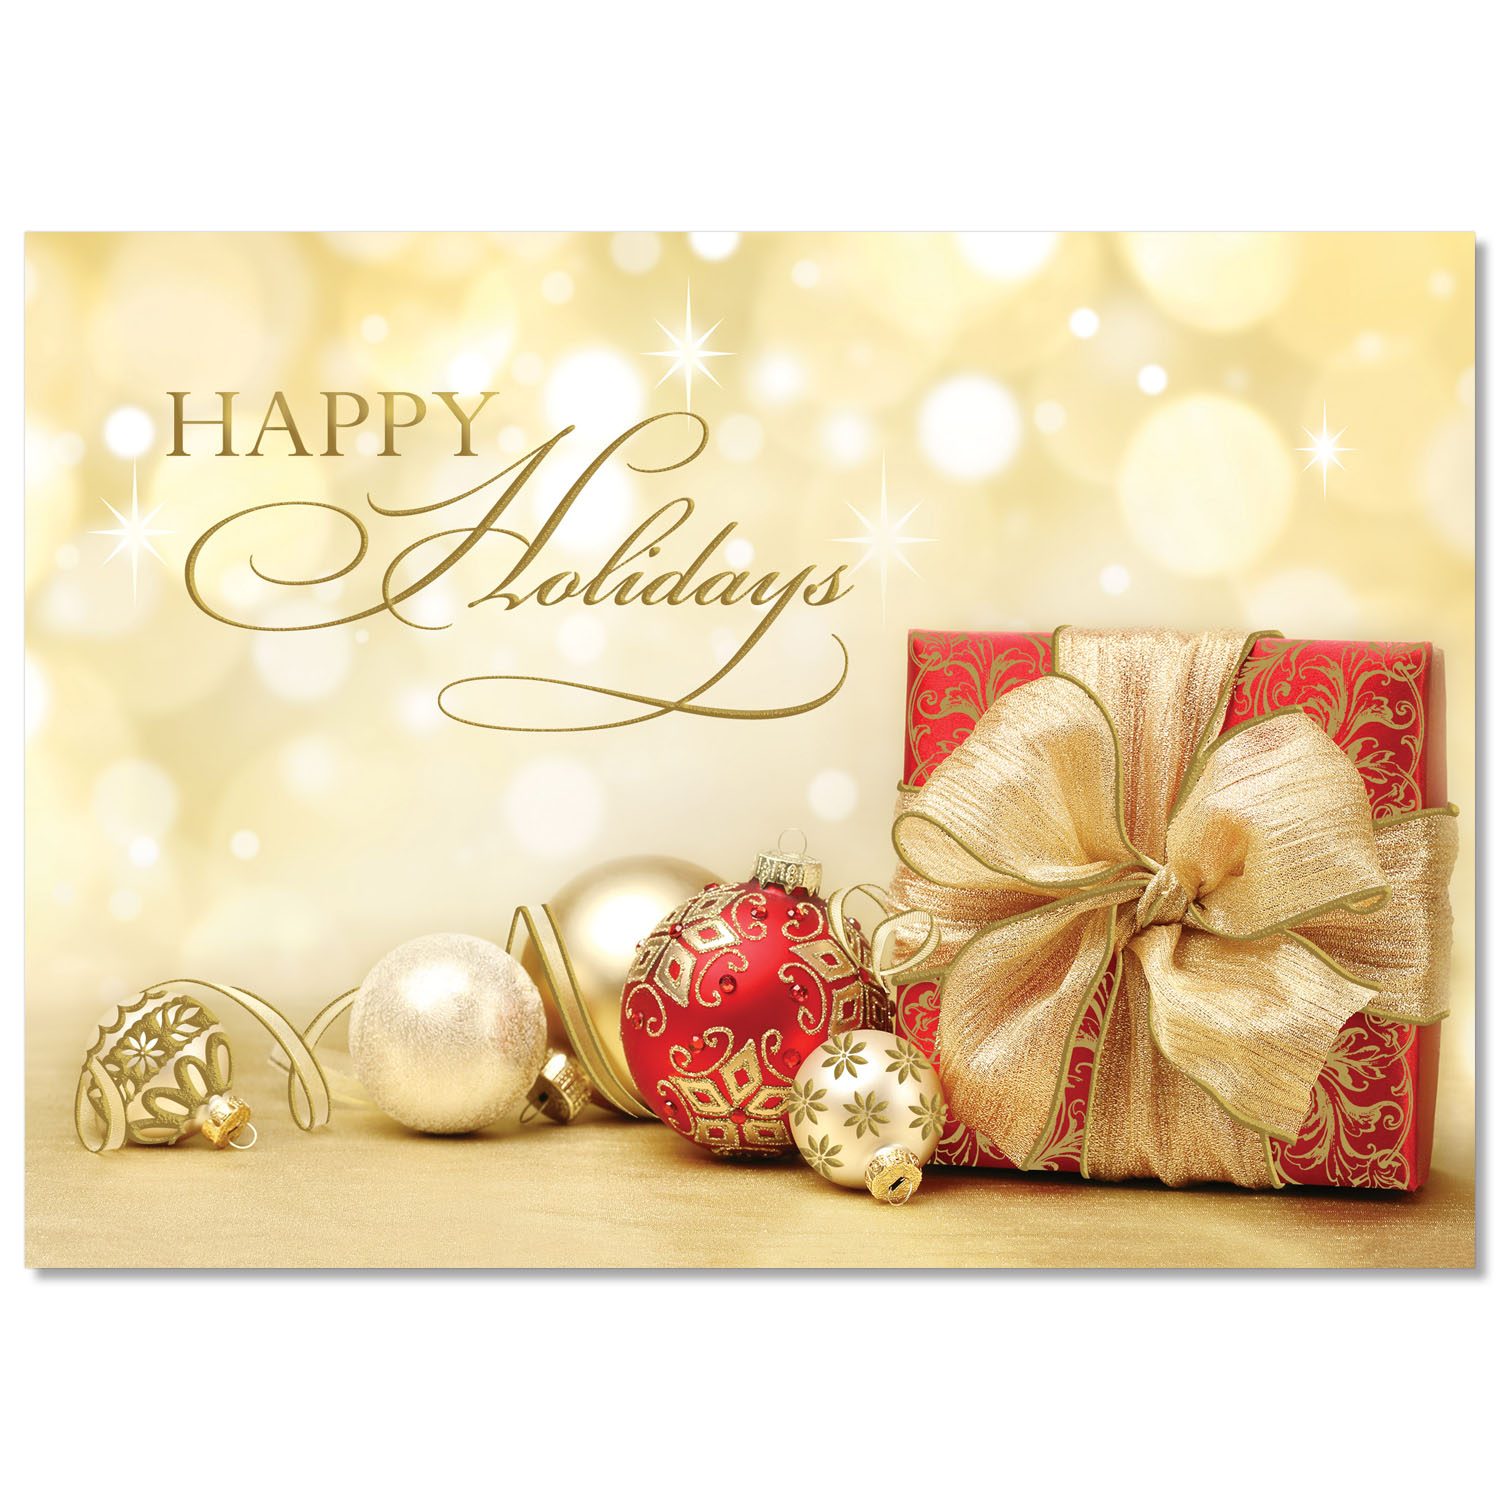 Gift and Ornaments Holiday Card